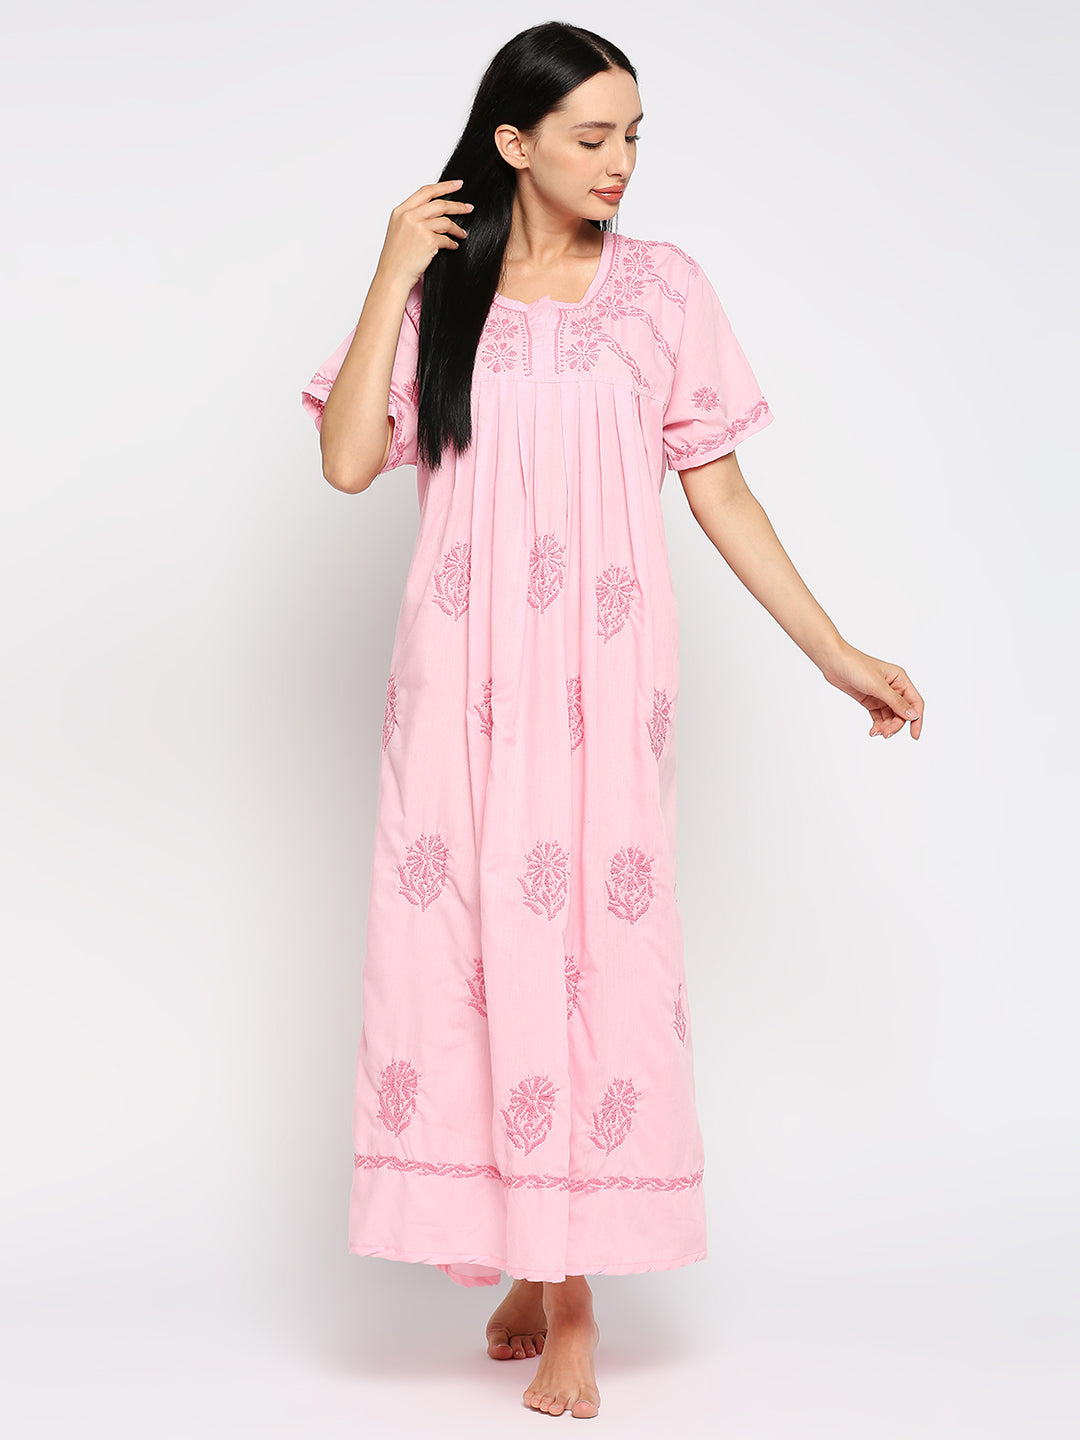 American Trends Nightgowns for Women Cotton Night India | Ubuy